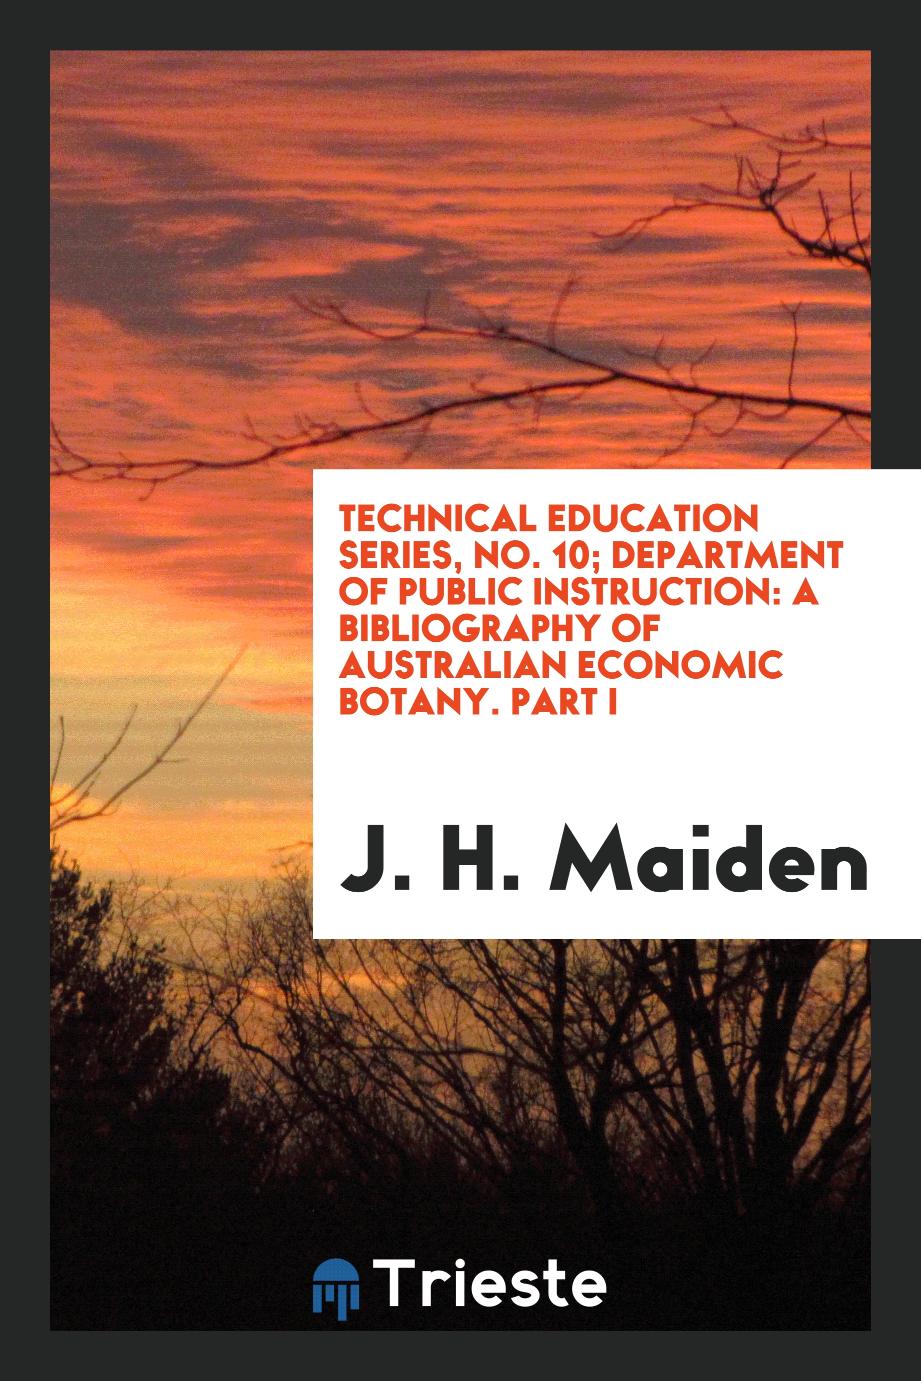 Technical education series, No. 10; Department of public instruction: A Bibliography of Australian Economic Botany. Part I